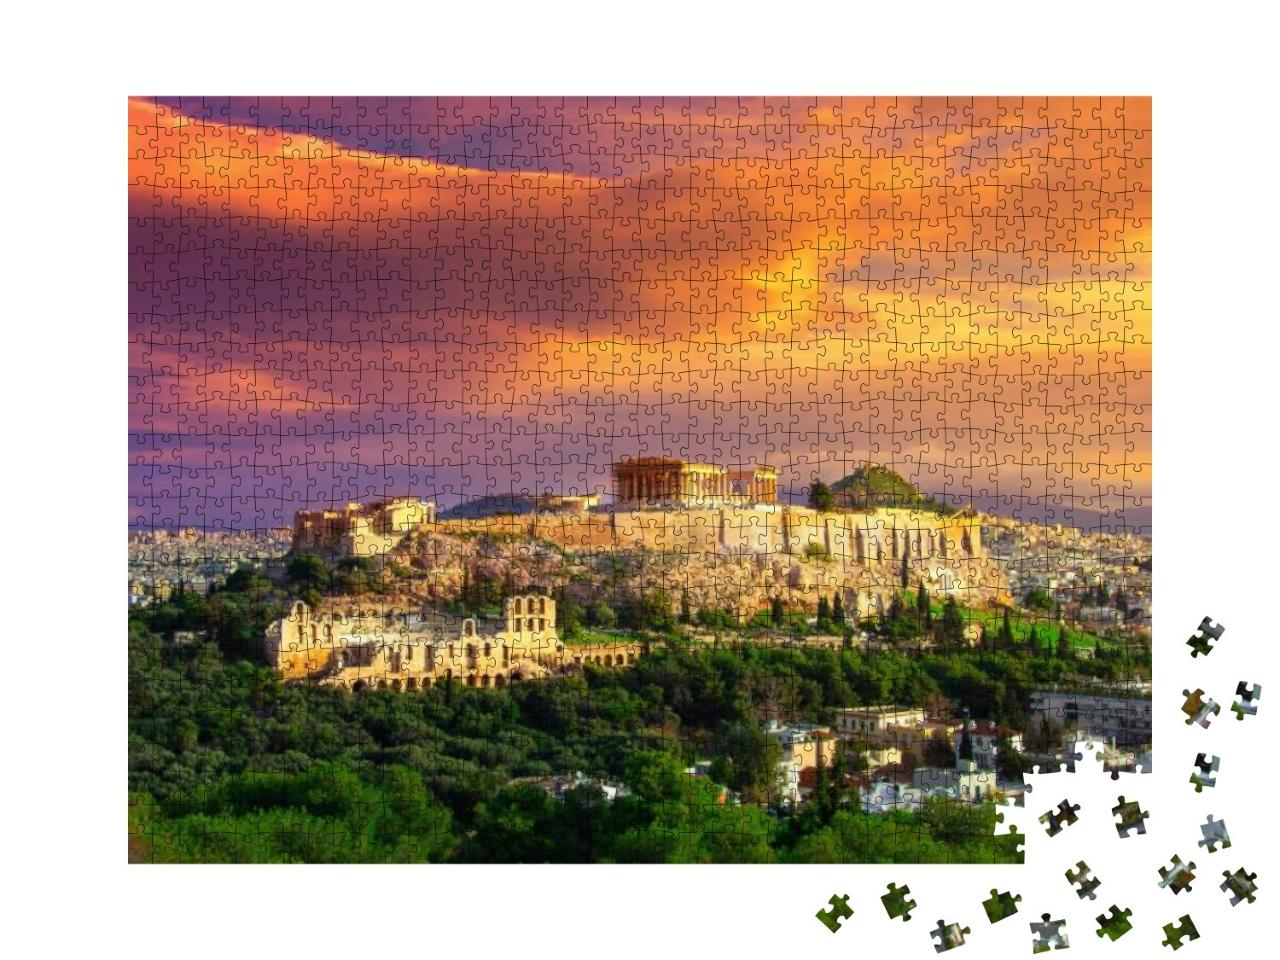 Acropolis with Parthenon. View Through a Frame with Green... Jigsaw Puzzle with 1000 pieces